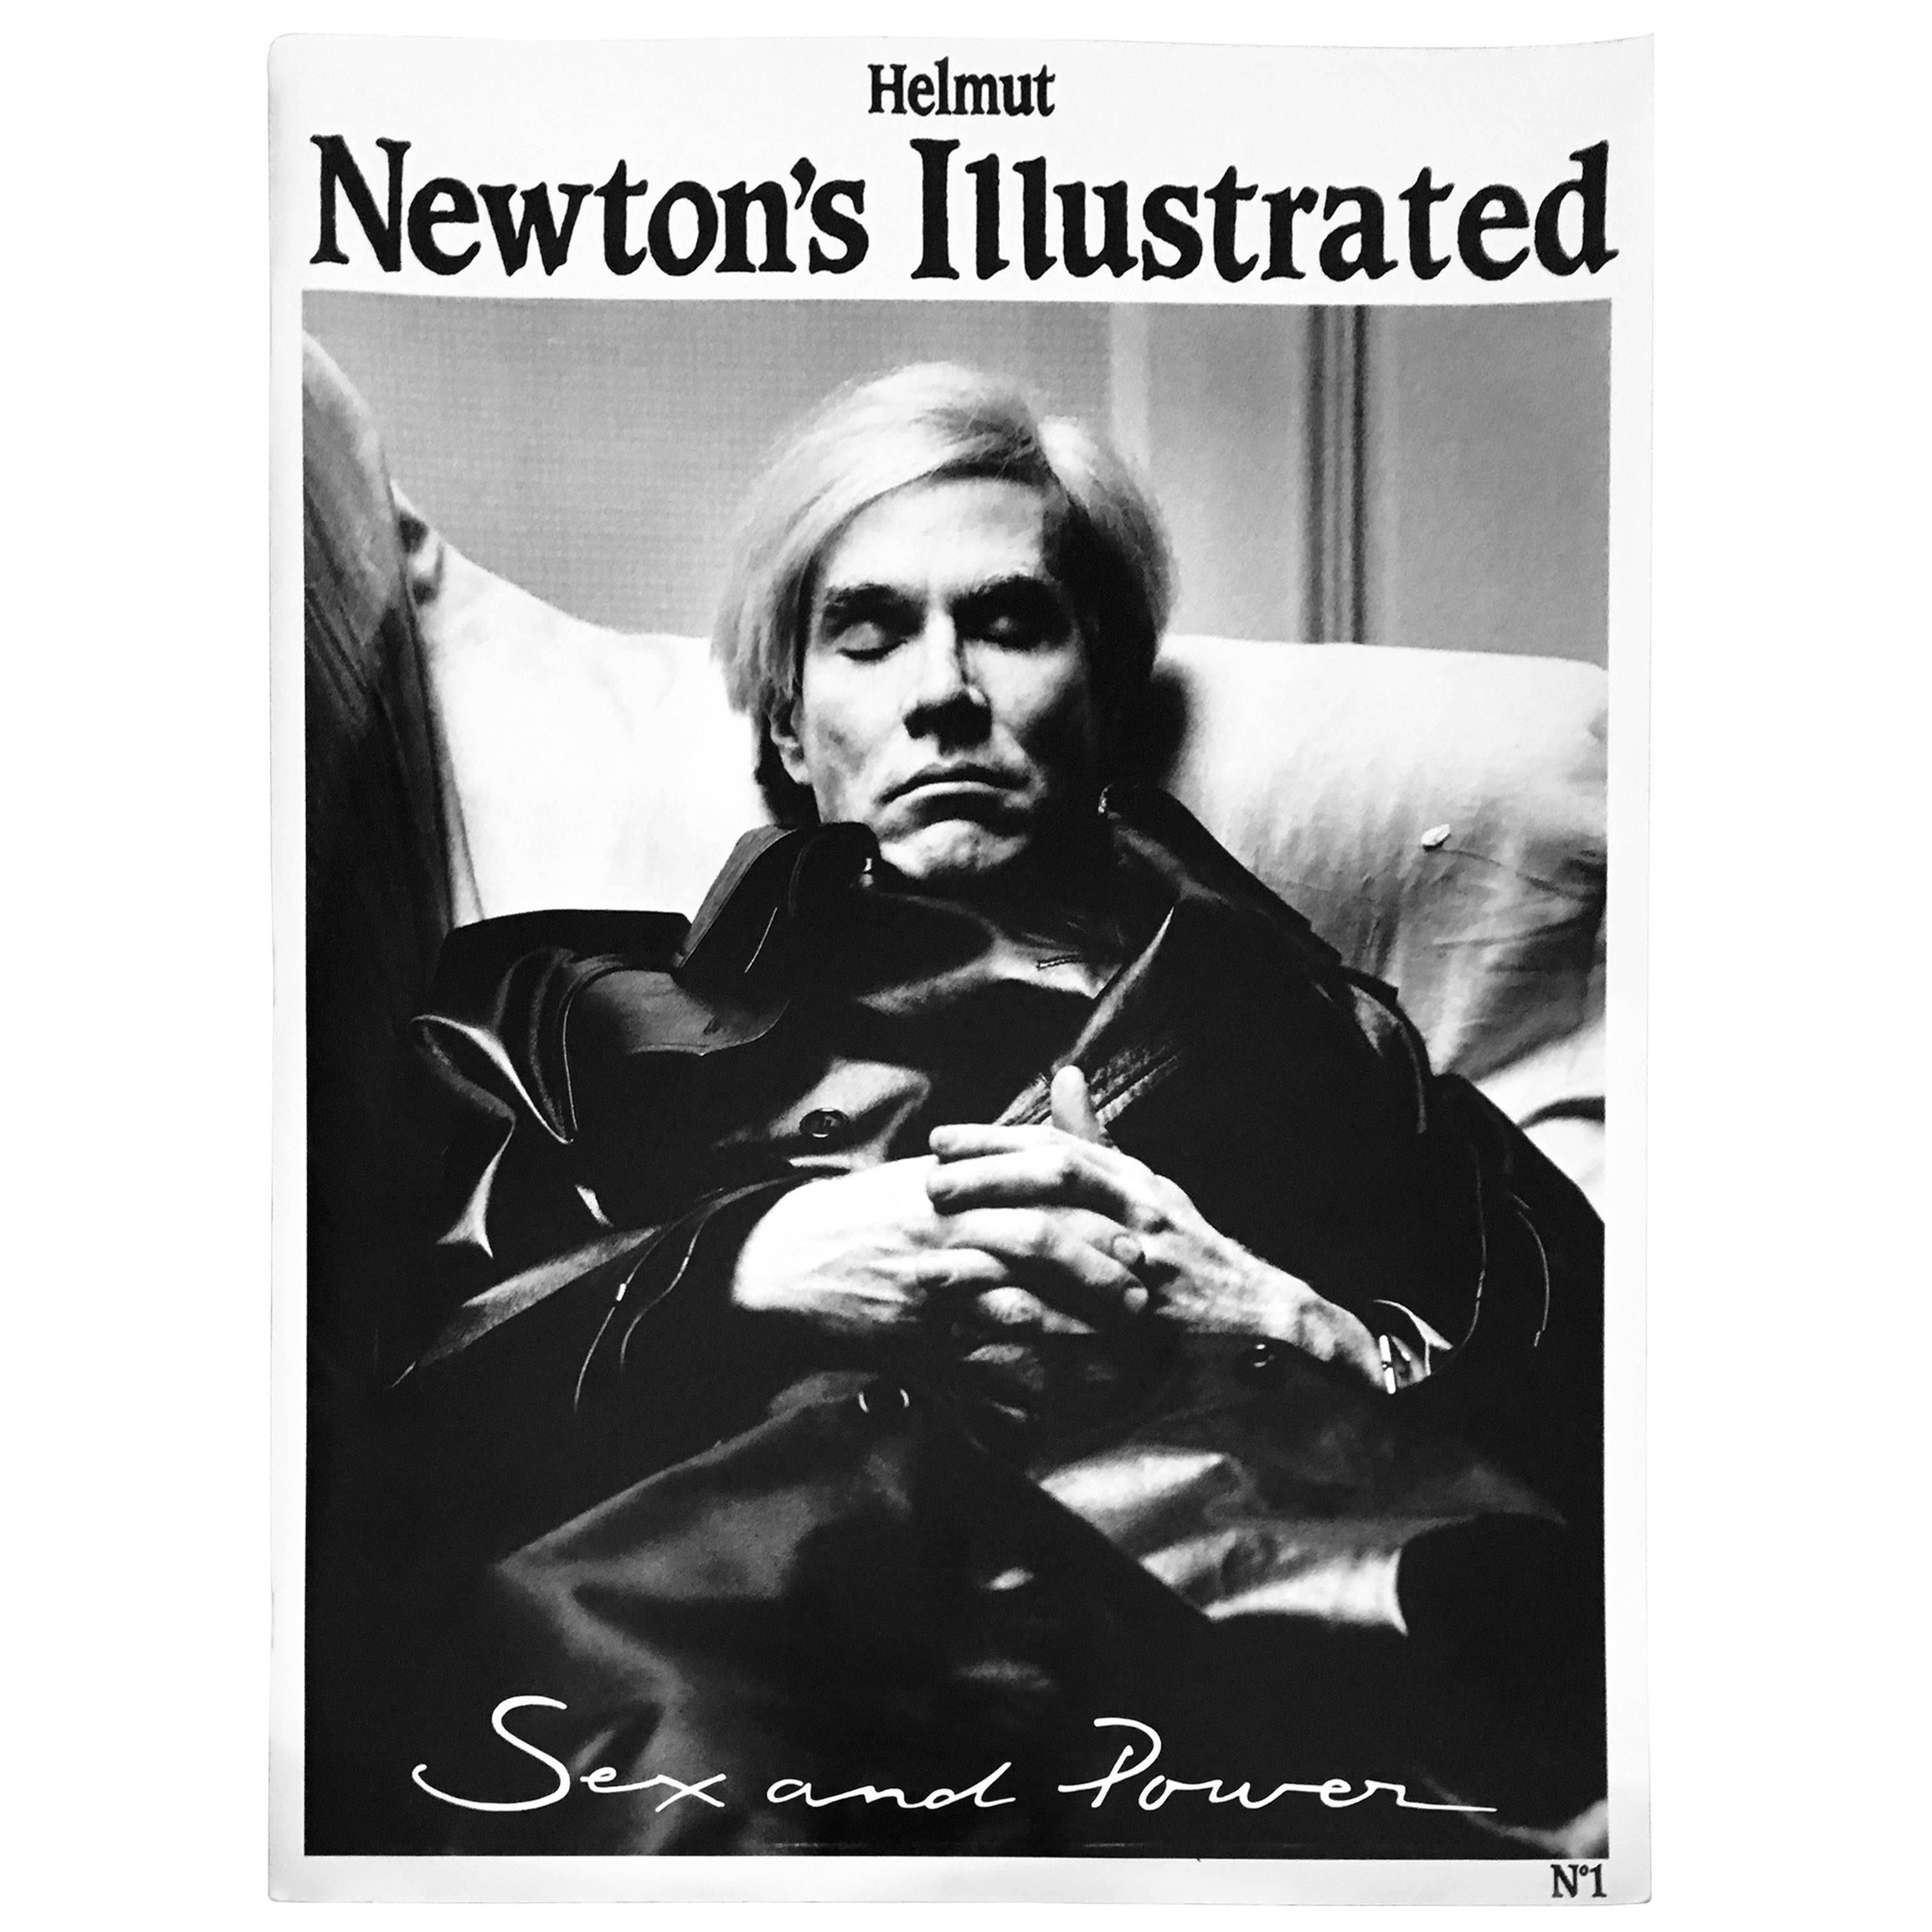 Helmut Newton's Illustrated No. 1, Sex and Power featuring Andy Warhol, 1987